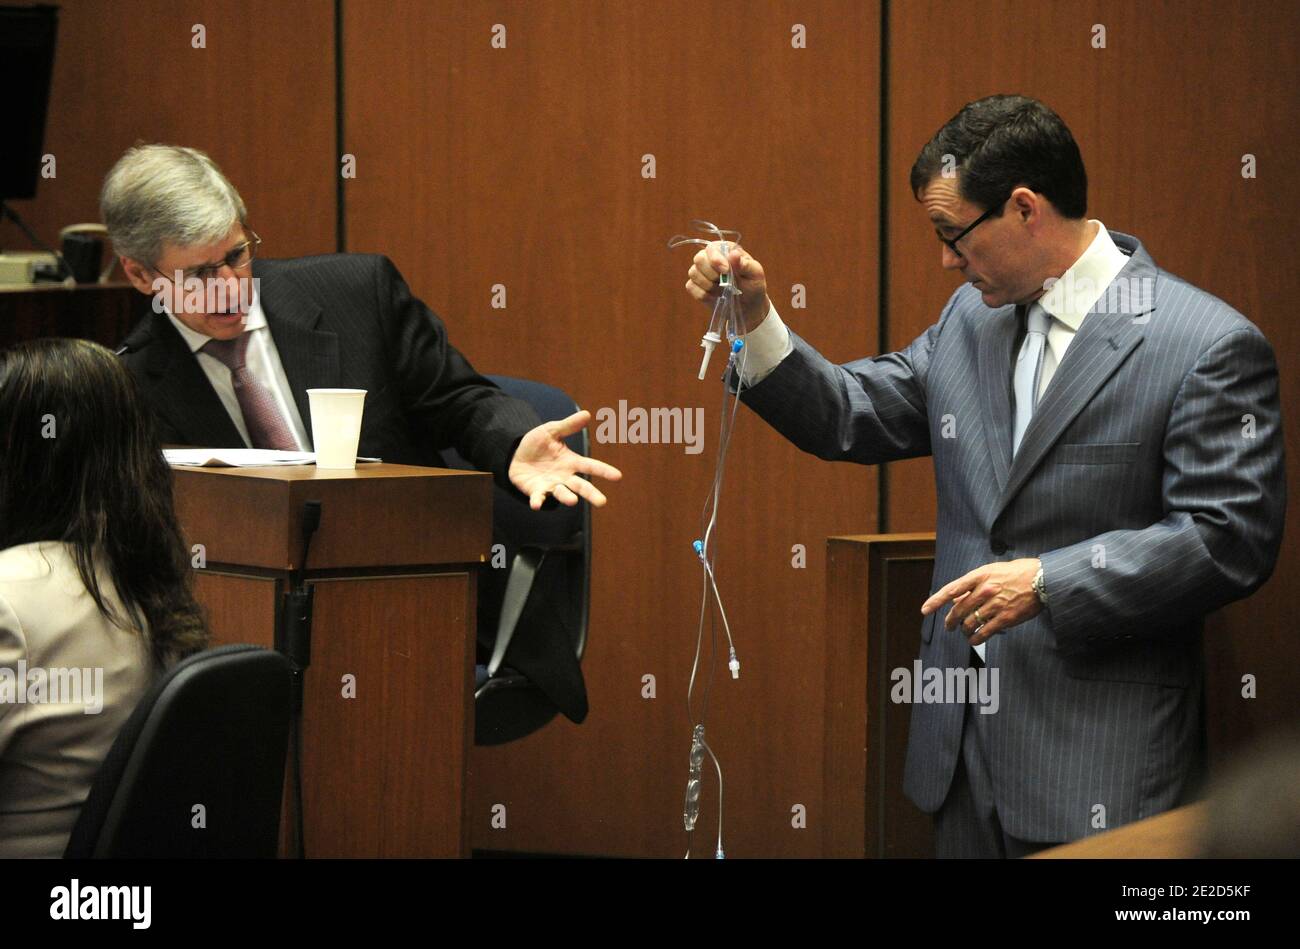 Defense attorney Ed Chernoff (R) holds up an intravenous drip (IV) during cross examination of propofol expert Dr. Steven Shafer (L) during the Dr. Conrad Murray trial in Los Angeles Superior Court in Los Angeles, California, USA on 24 October 2011. Murray has pleaded not guilty and faces four years in prison and the loss of his medical licenses if convicted of involuntary manslaughter in Michael Jackson's death. Photo by Paul Buck/Pool/ABACAPRESS.COM Stock Photo